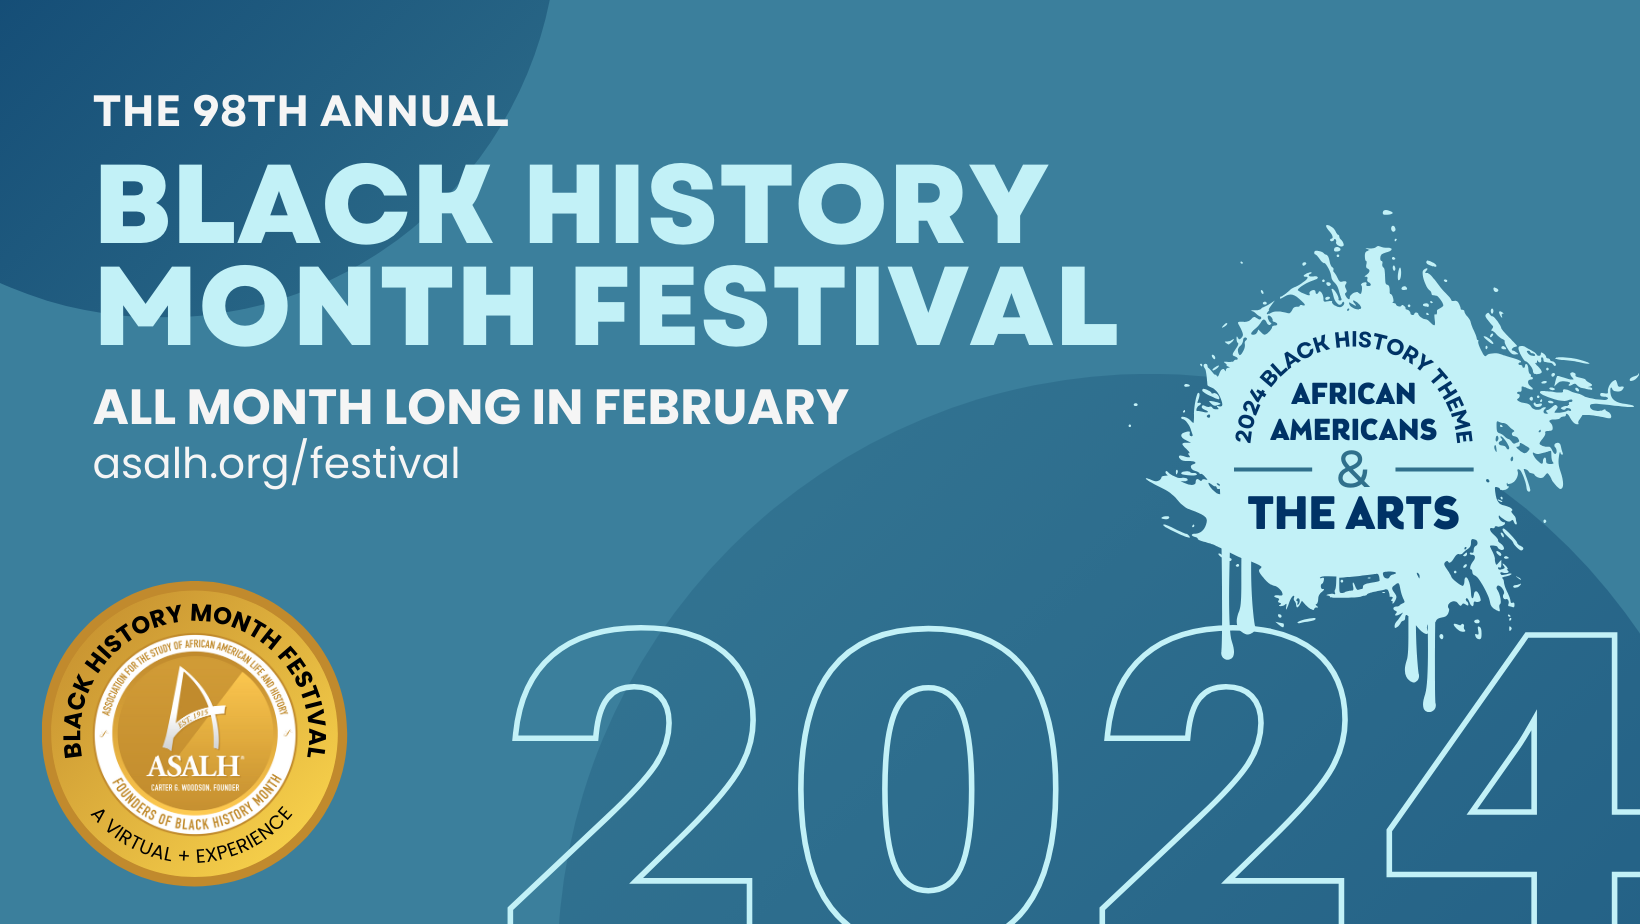 The image is a promotional poster for the 98th Annual Black History Month Festival with text describing the event's theme and dates. It features a logo and graphic design elements related to Black history. The poster promotes a virtual experience and includes information about the founder, Carter G. Woodson.